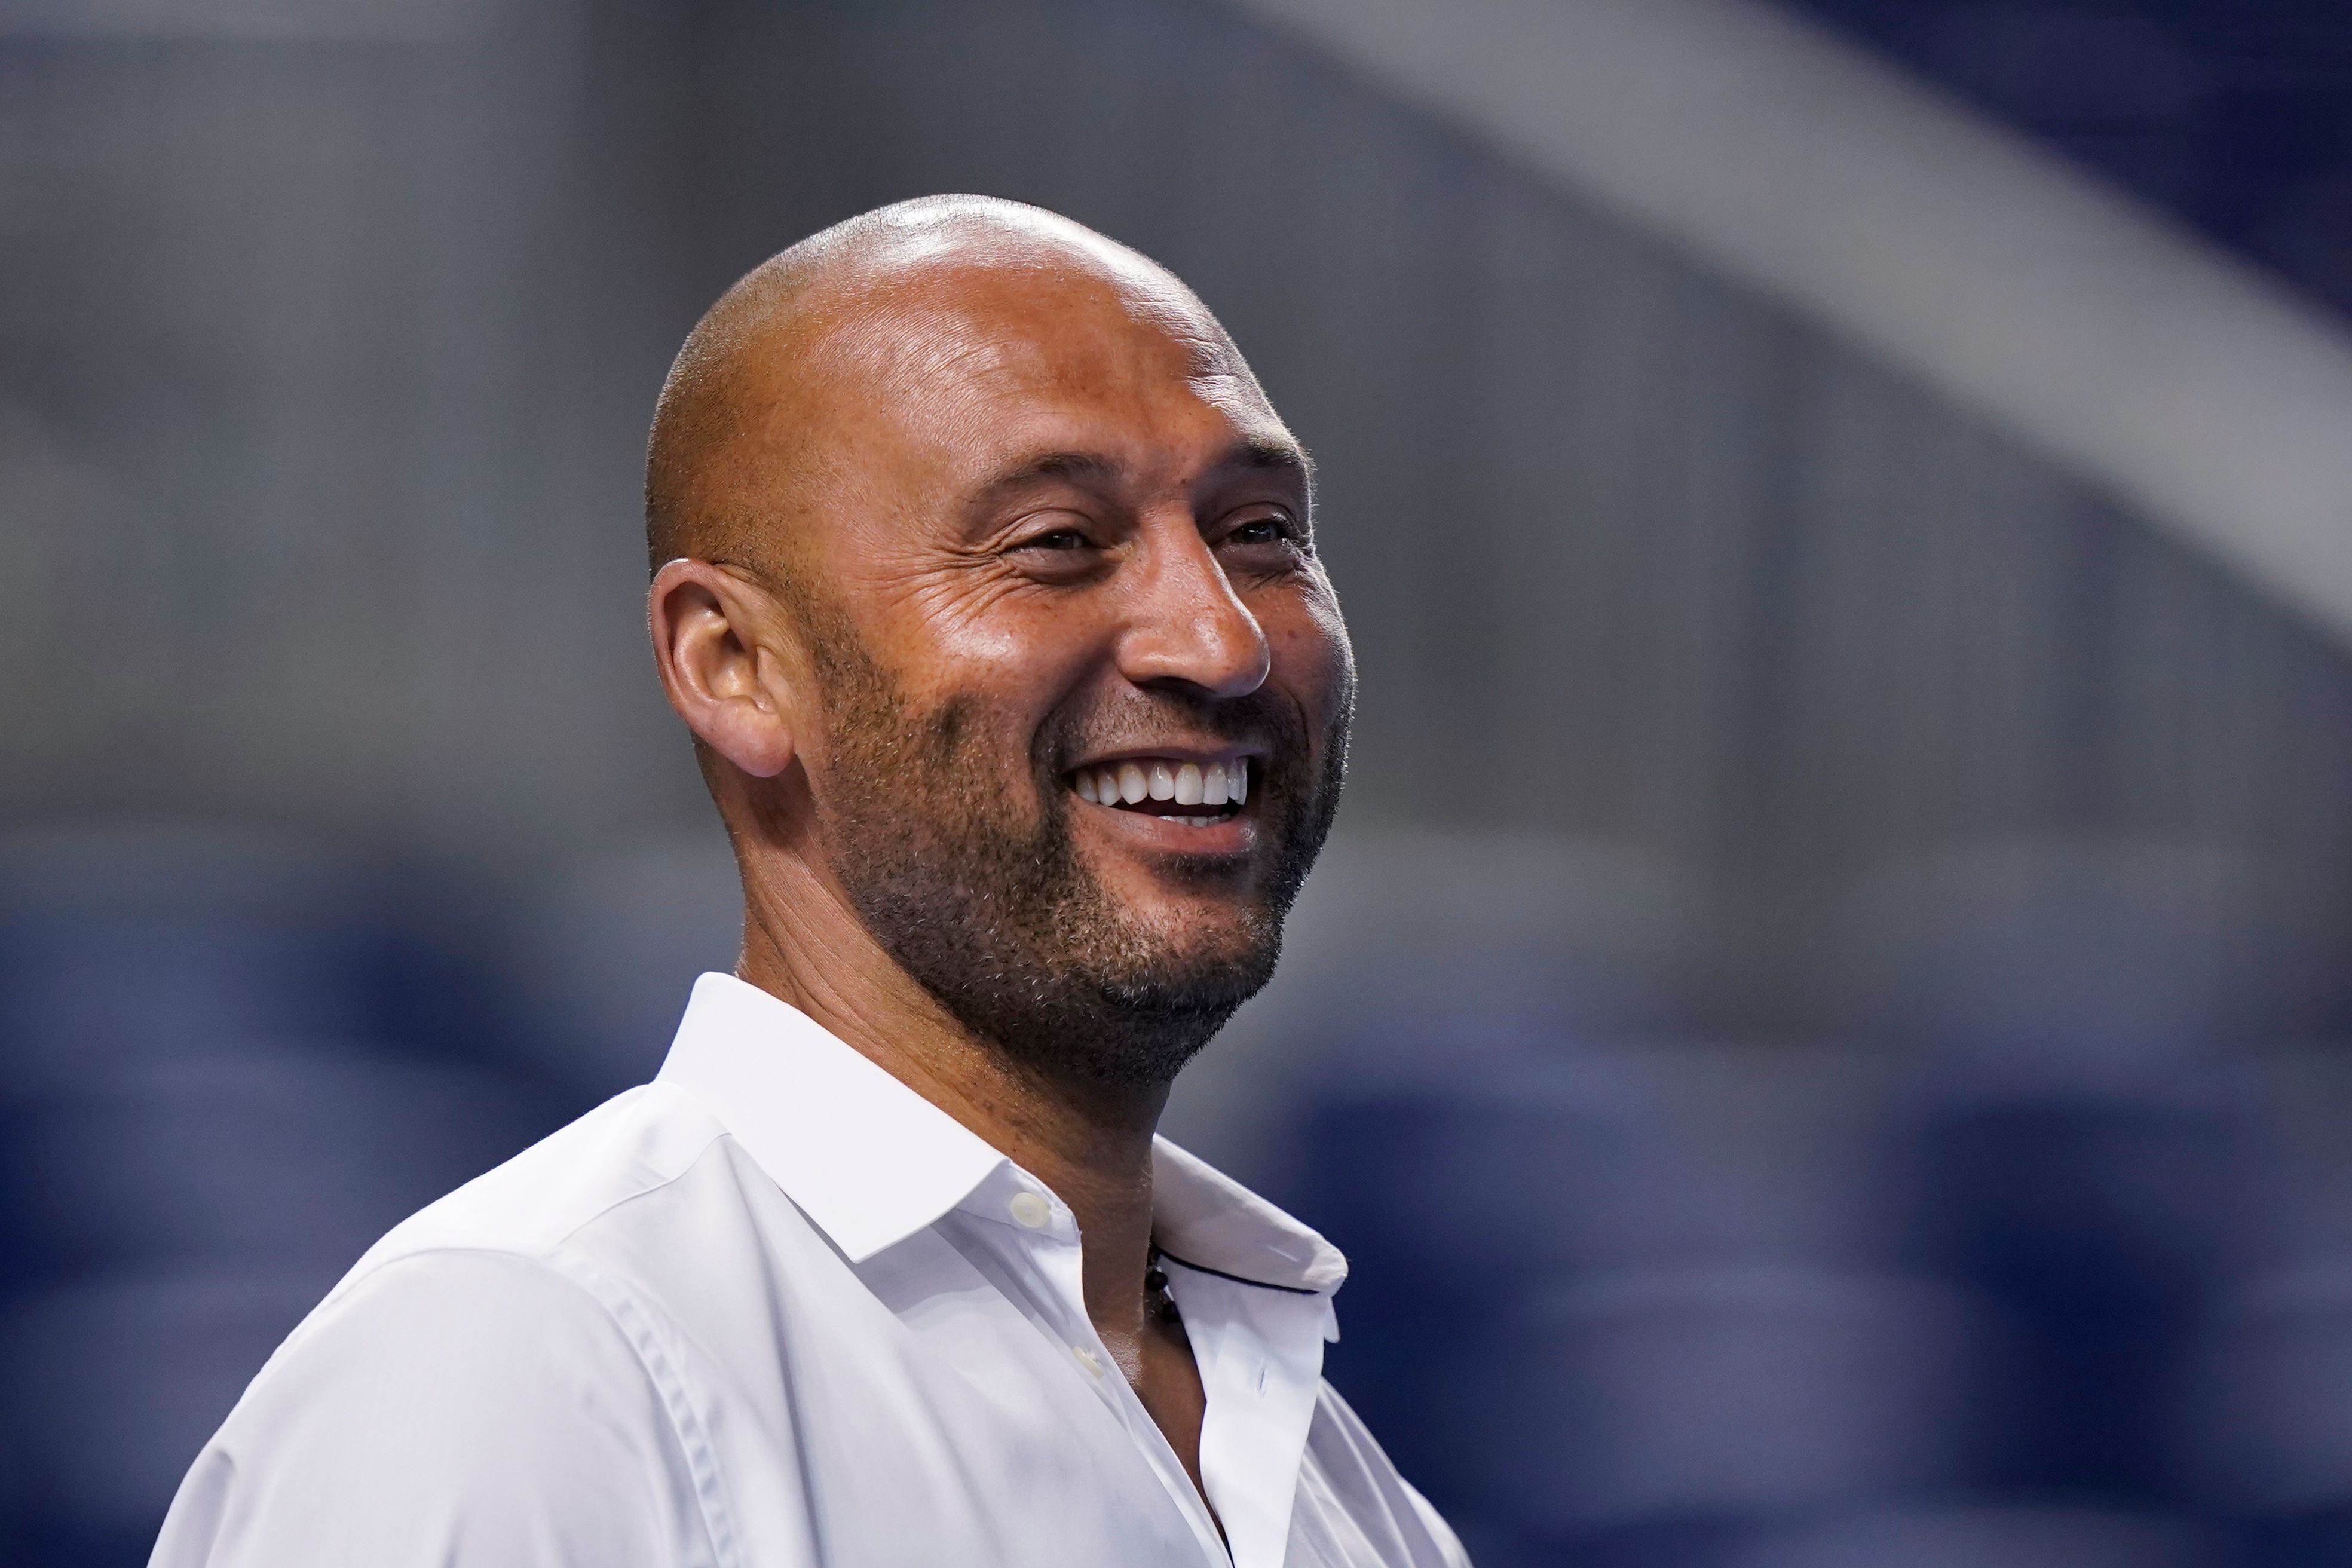 How Derek Jeter Went From Major Player to Married Dad